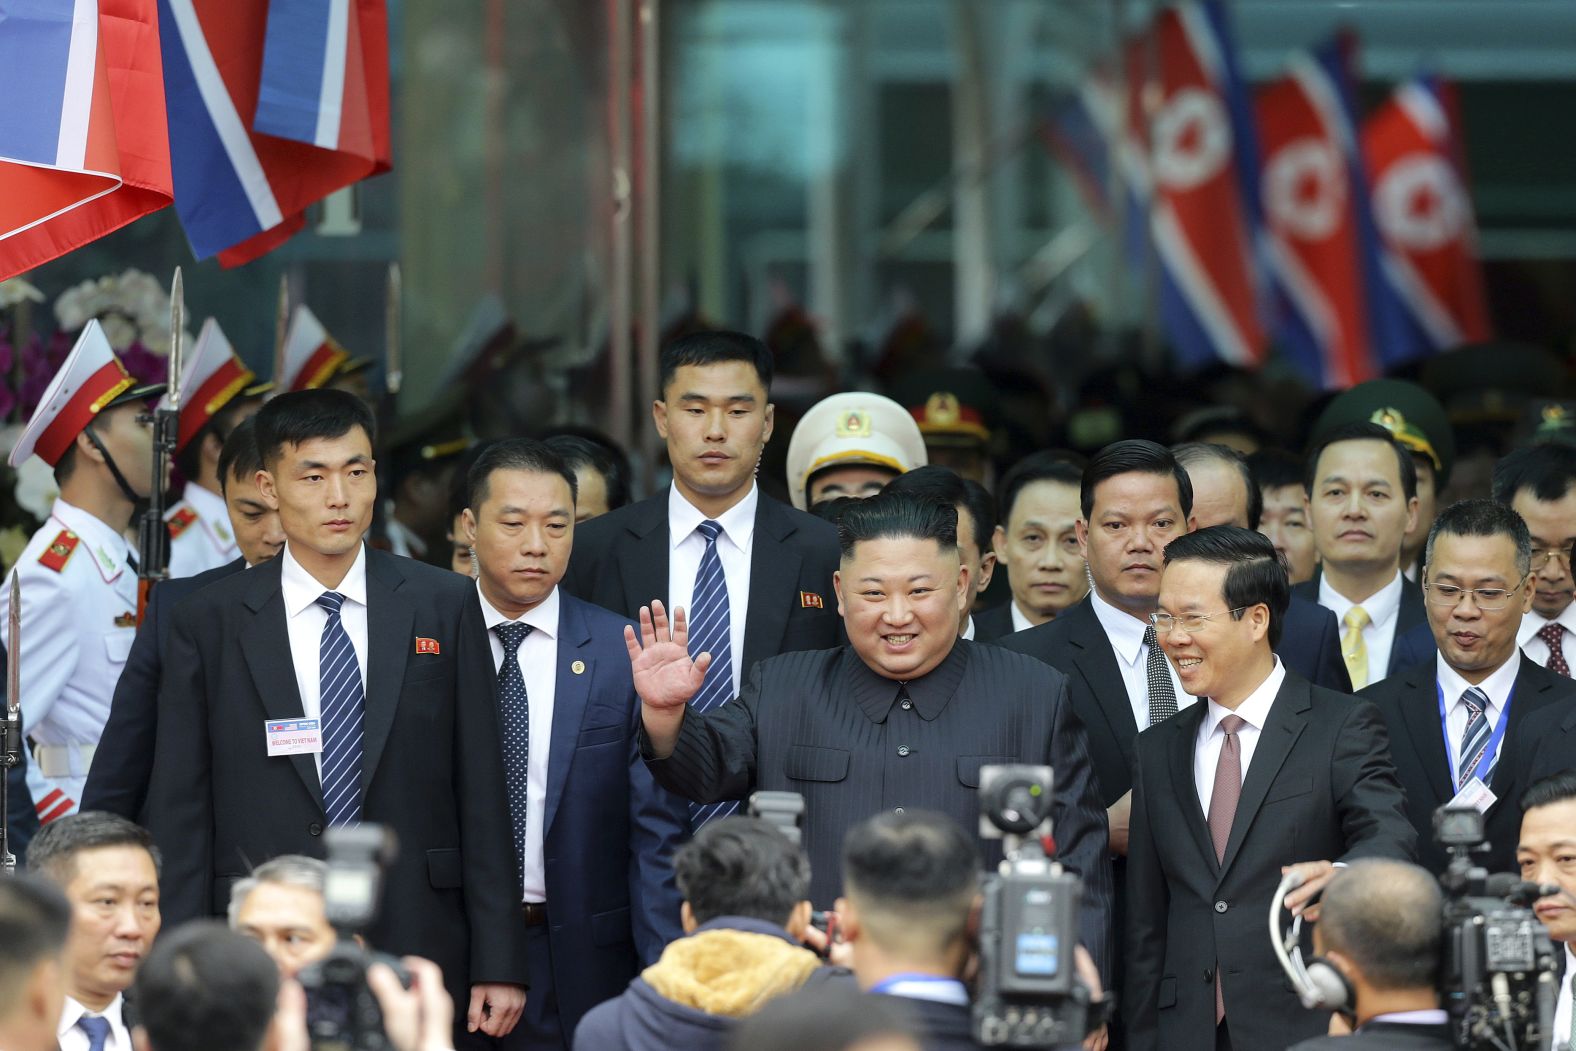 Kim waves after <a href="index.php?page=&url=https%3A%2F%2Fwww.cnn.com%2F2019%2F02%2F25%2Fasia%2Fkim-jong-un-vietnam-arrive-train-intl%2Findex.html" target="_blank">arriving to Vietnam by train</a> on February 26. The train trip lasted two and a half days and covered about 2,800 miles.